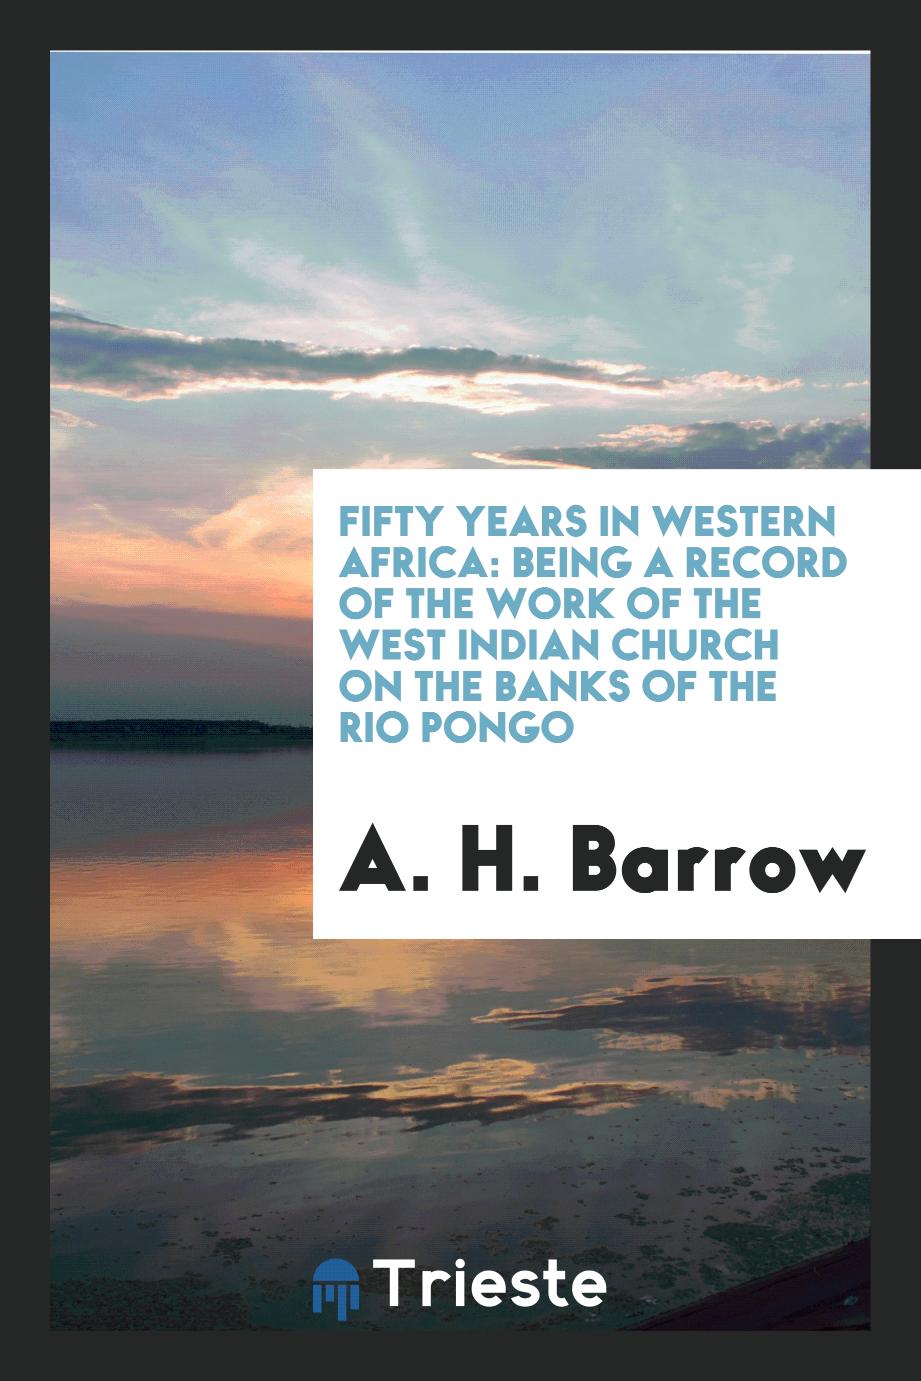 Fifty Years in Western Africa: Being a Record of the Work of the West Indian Church on the Banks of the Rio Pongo